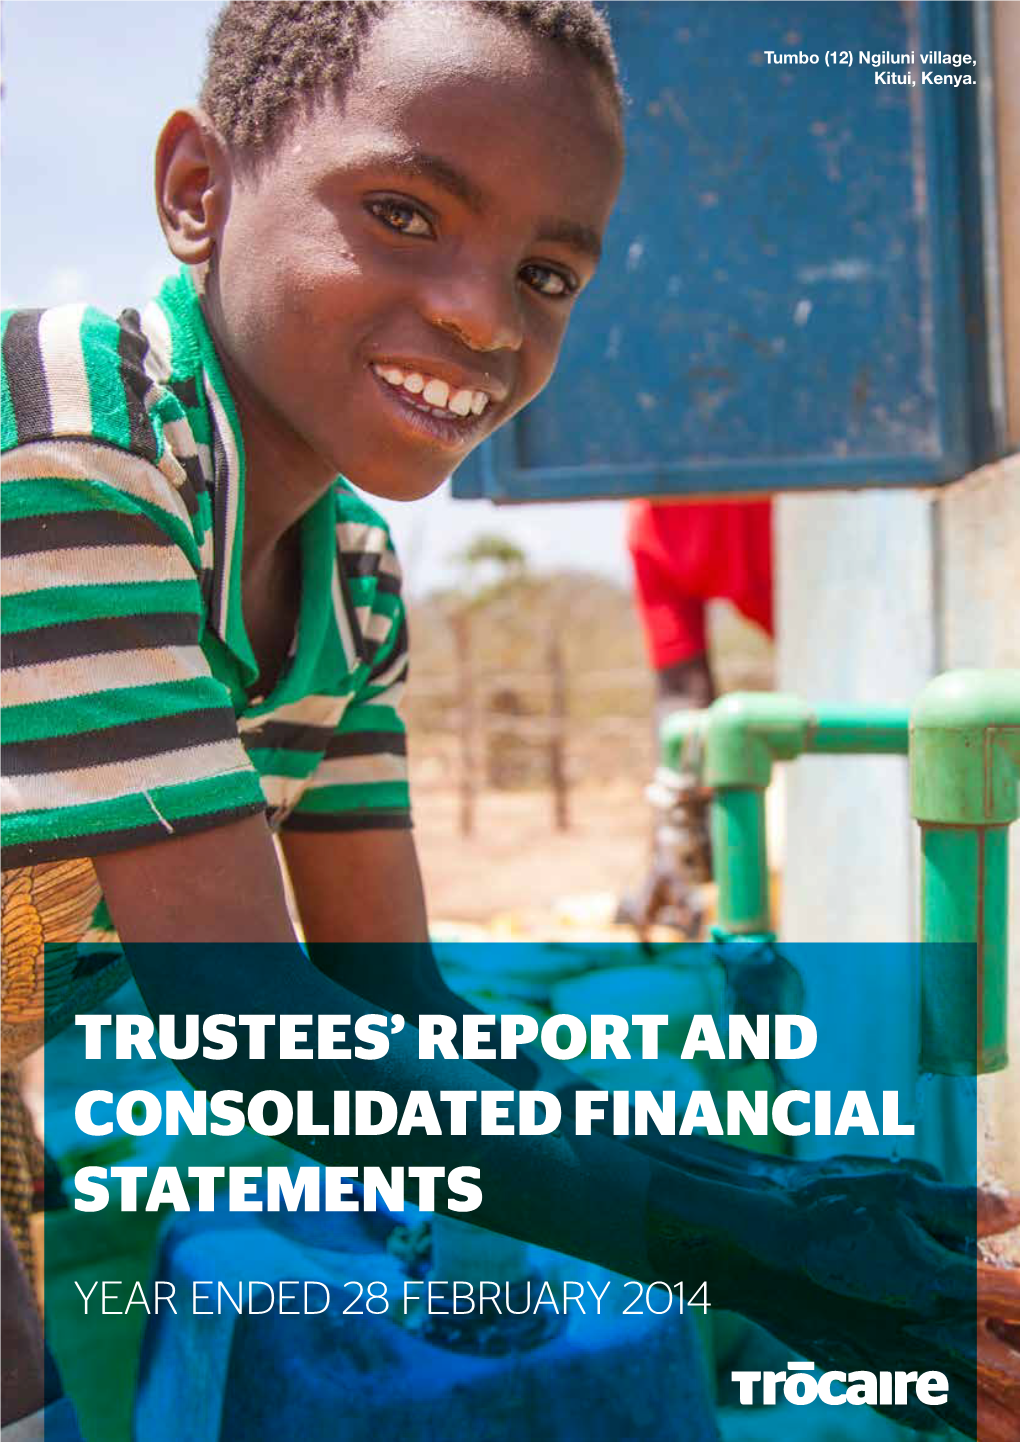 Trustees' Report and Consolidated Financial Statements Year Ended